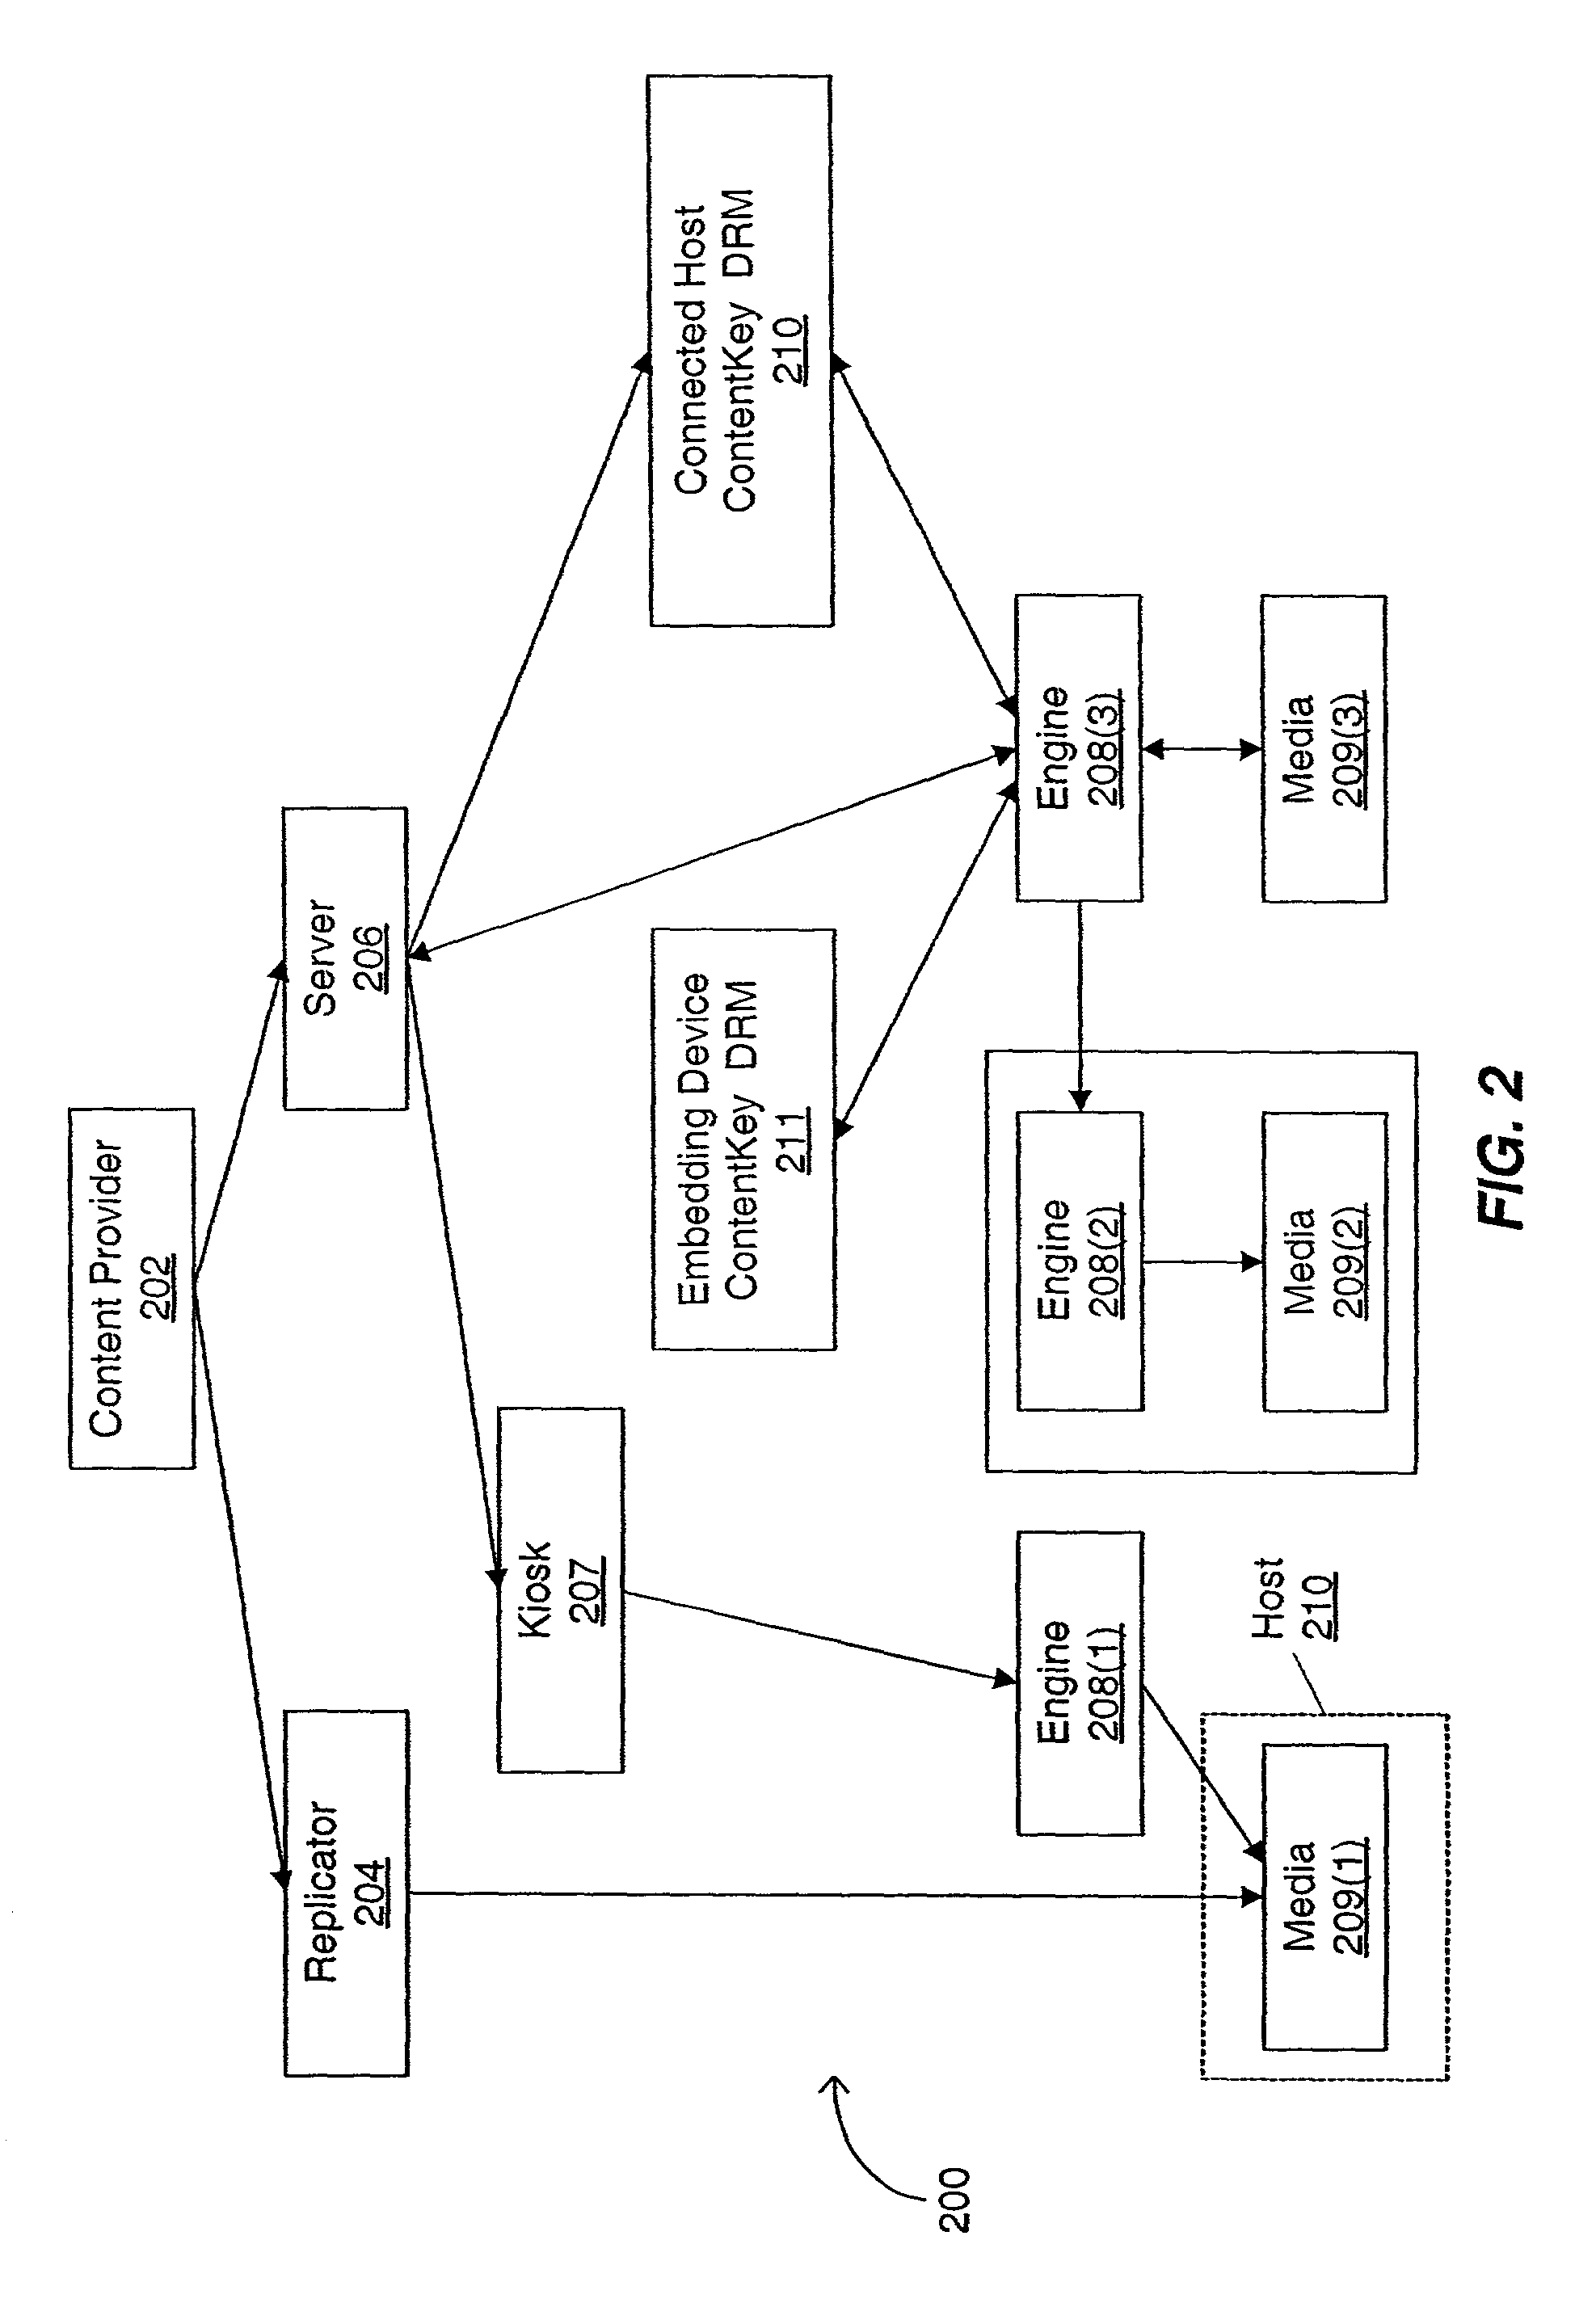 Secure access method and system